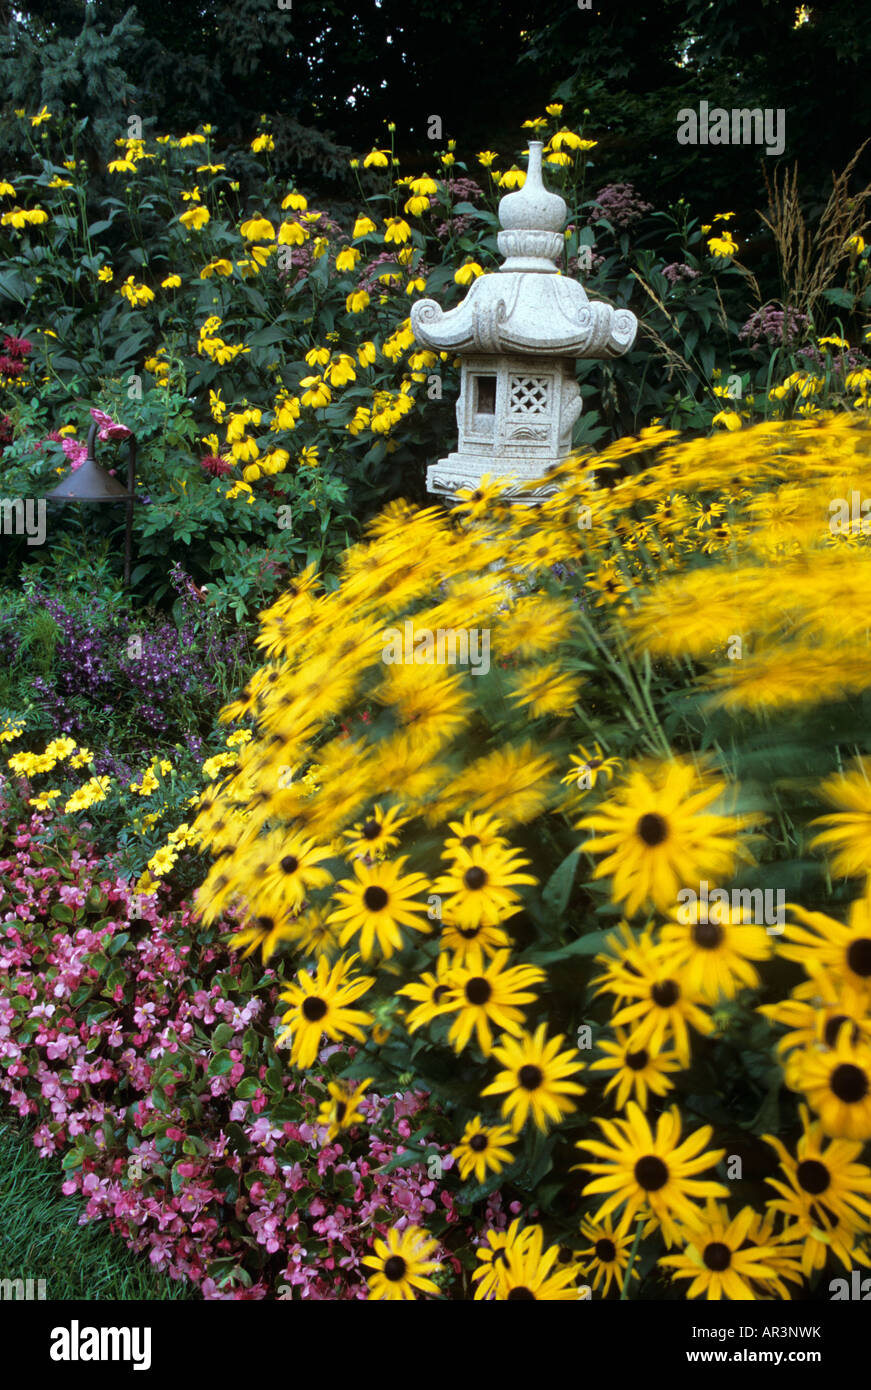 BLOWN BY THE WIND, RUDBECKIA AND BEGONIA PLANTS SURROUND ORNATE CONCRETE BIRDHOUSE IN A MINNESOTA GARDEN.  SUMMER. Stock Photo